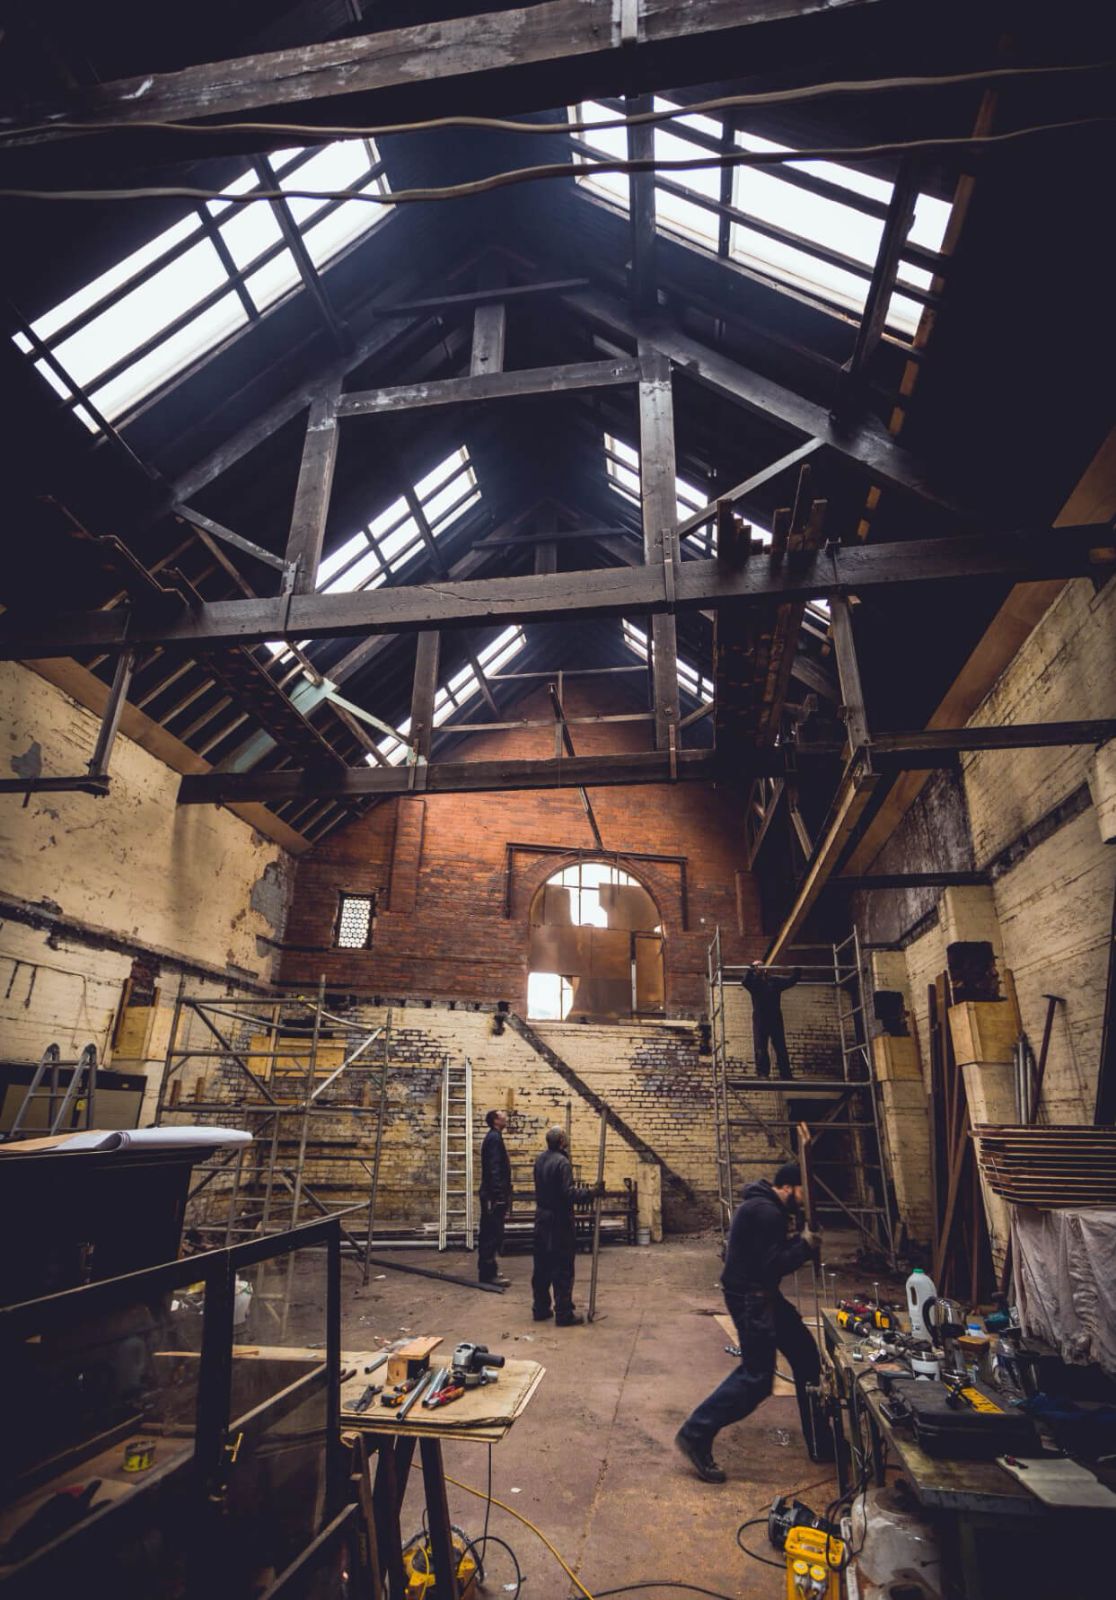 The Mowbray venue in Sheffield during renovation of the former industrial building with exposed wood beams 